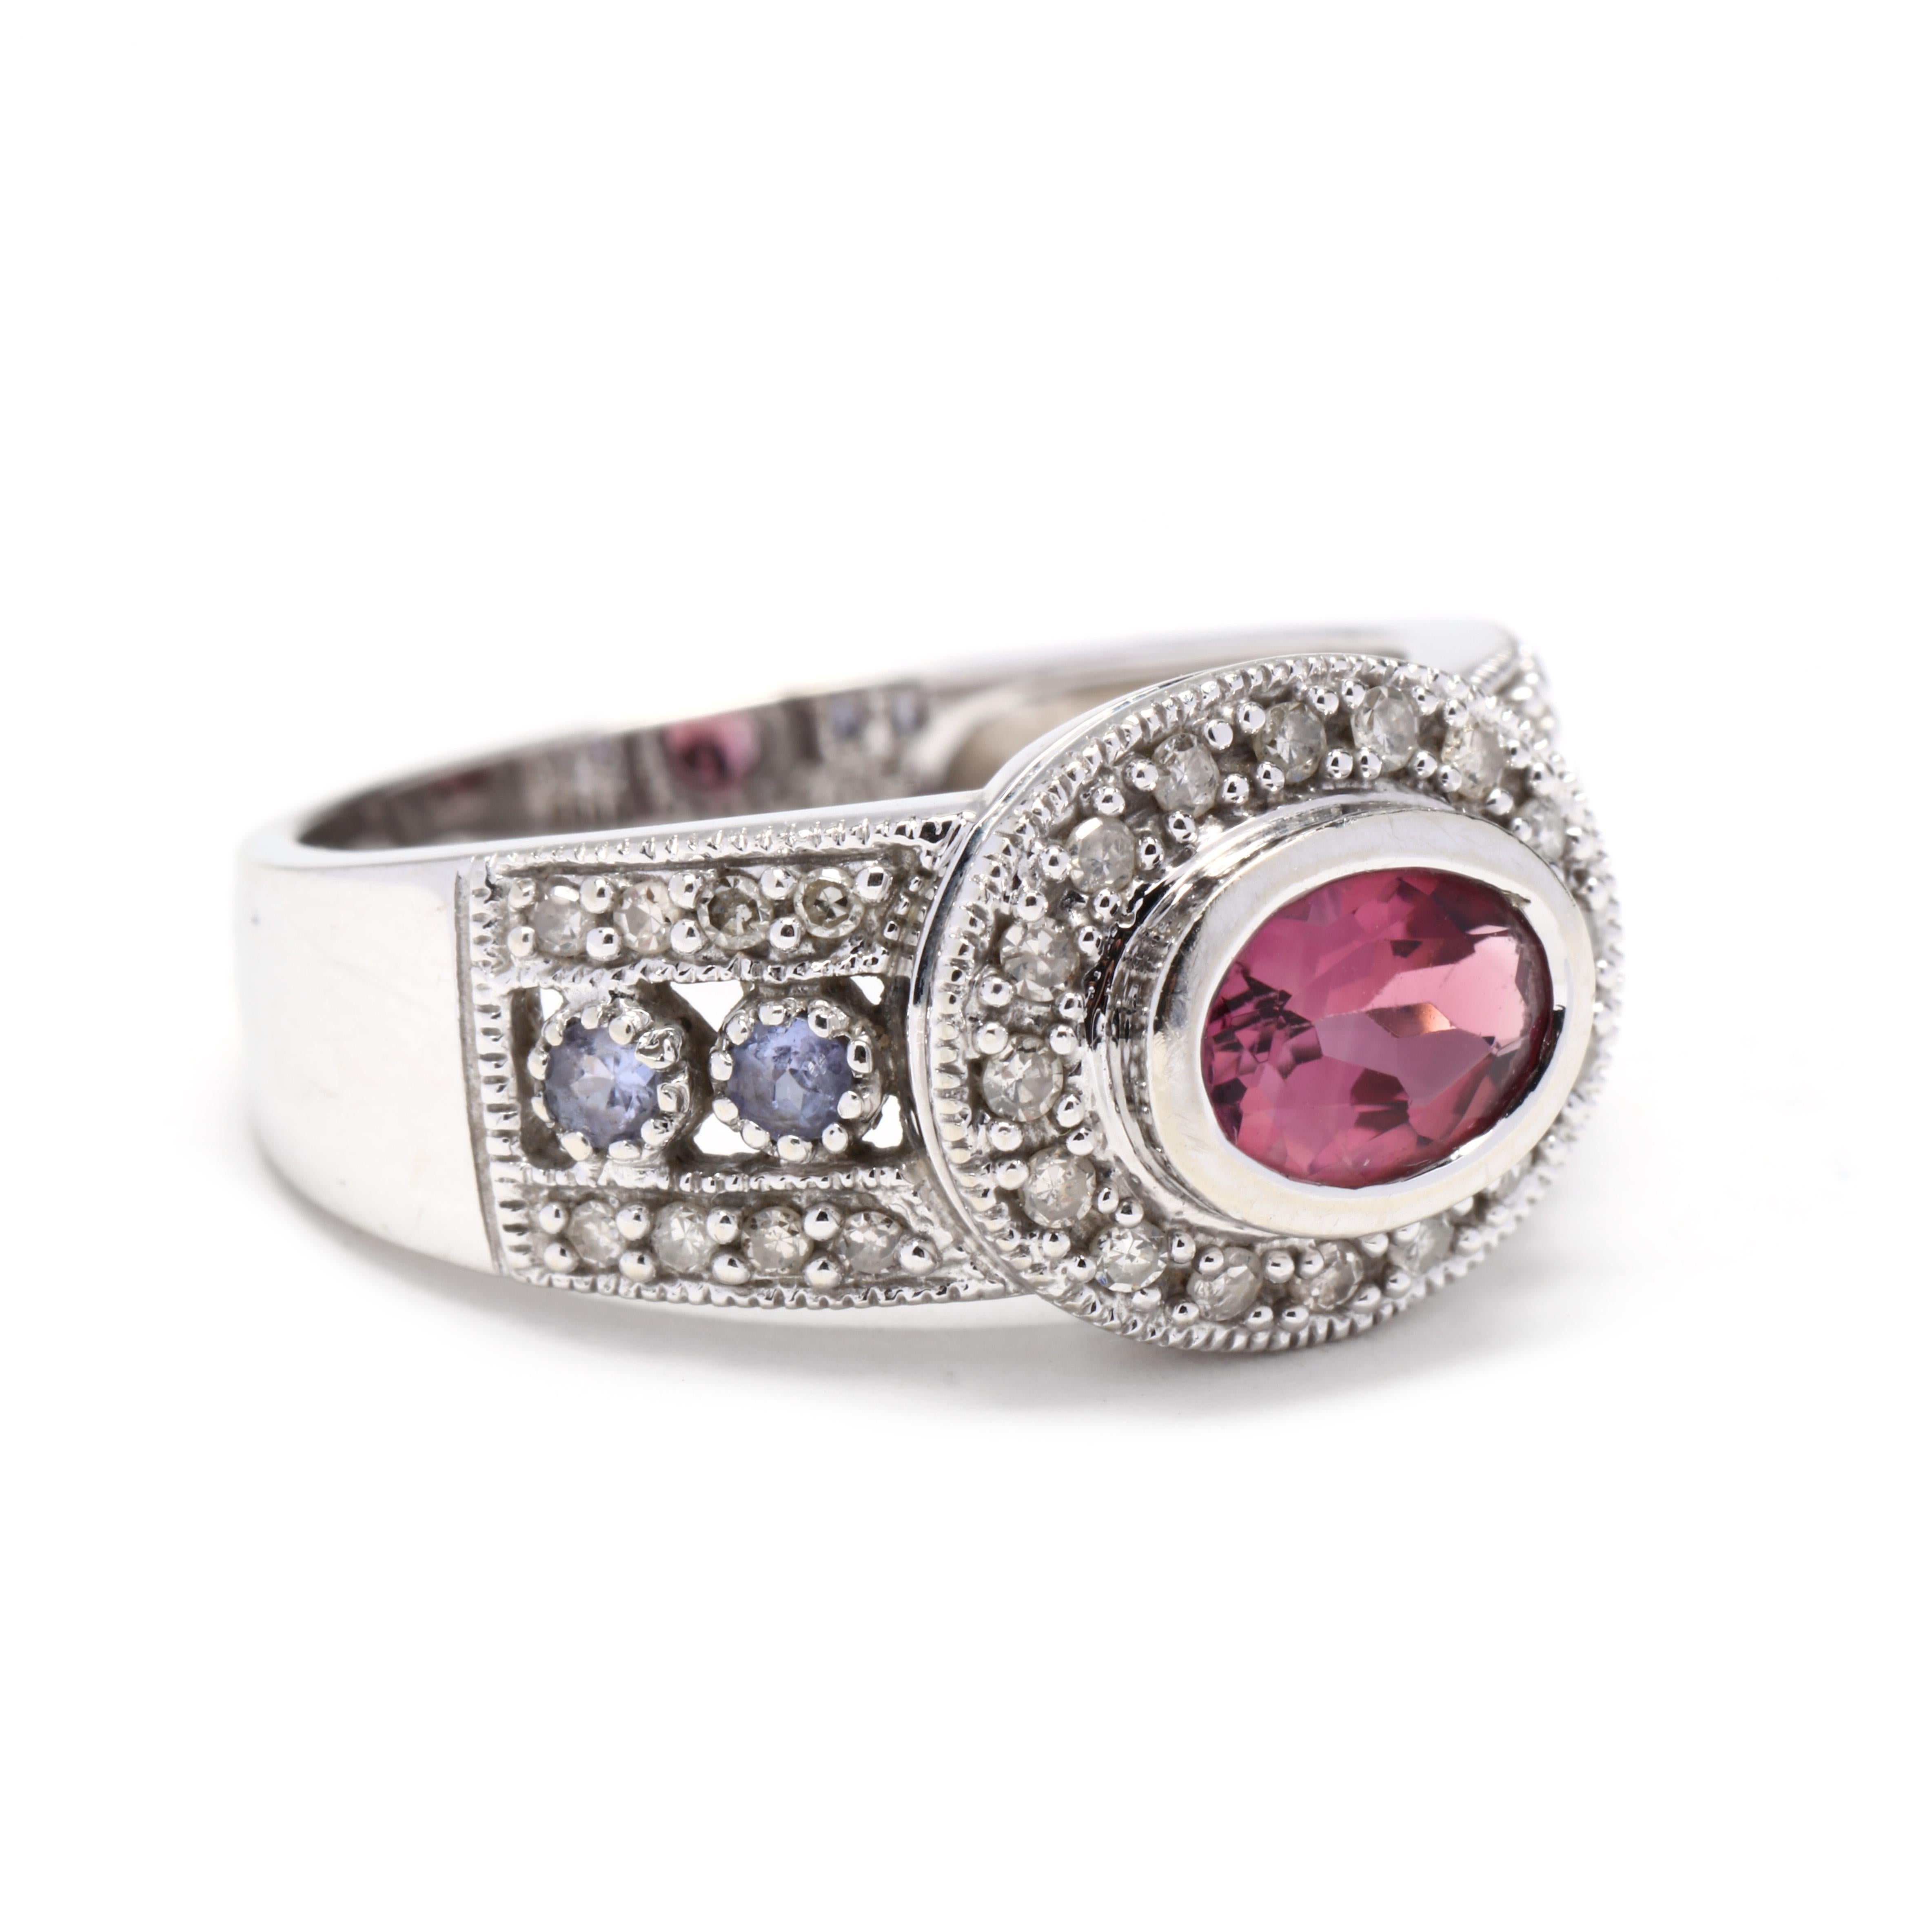 A 14 karat white gold pink tourmaline, amethyst and diamond band ring. This ring features a horizontal bezel set, oval cut pink tourmaline weighing approximately 1.20 carats surrounded by a halo of single cut round diamonds with a three row band set